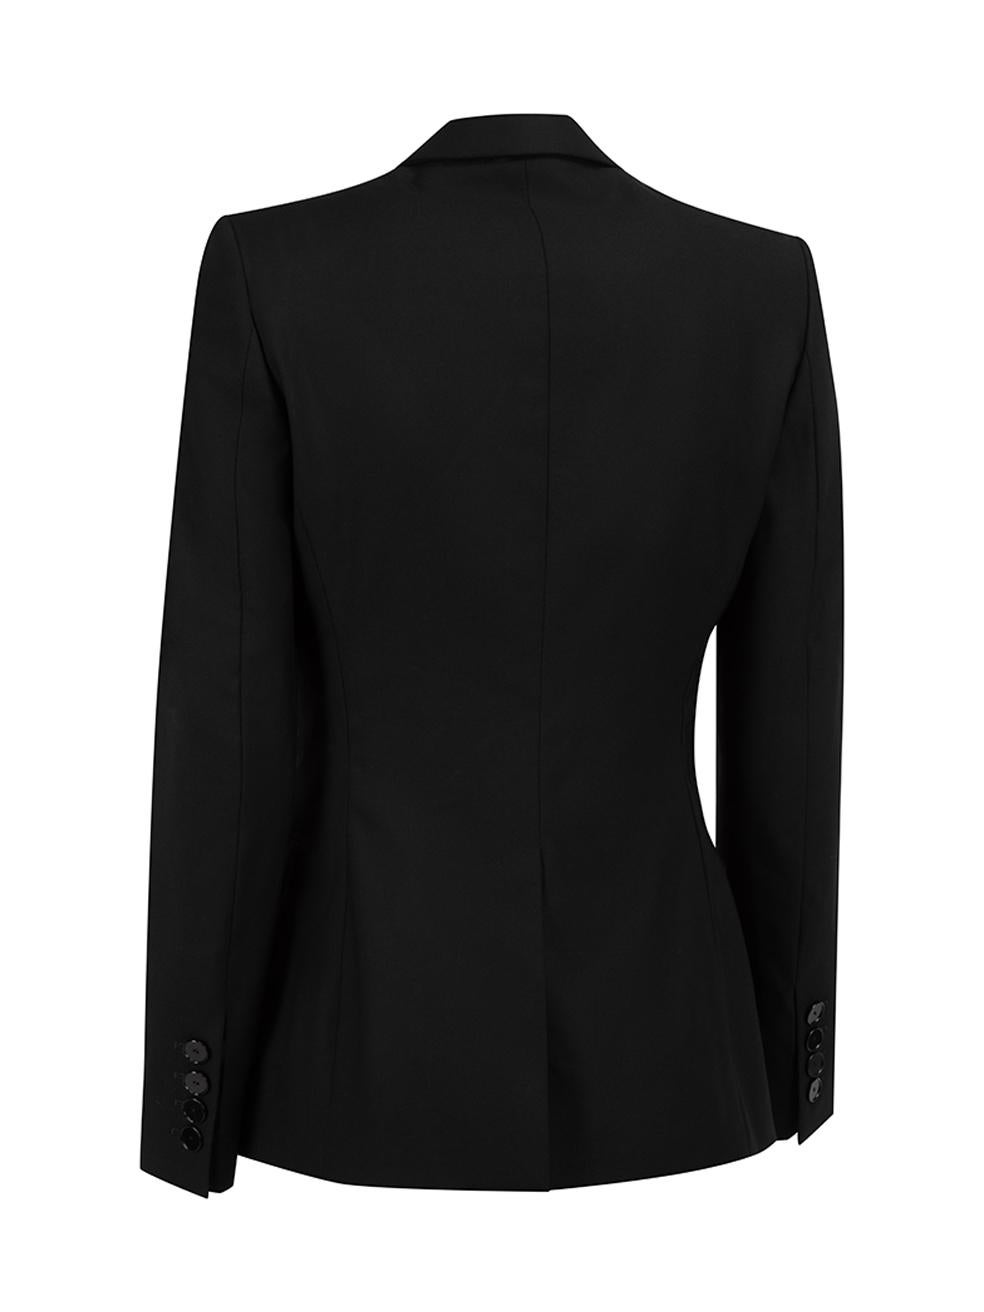 Pre-Loved Stella McCartney Women's Black Wool Fitted Blazer Jacket In Excellent Condition In London, GB